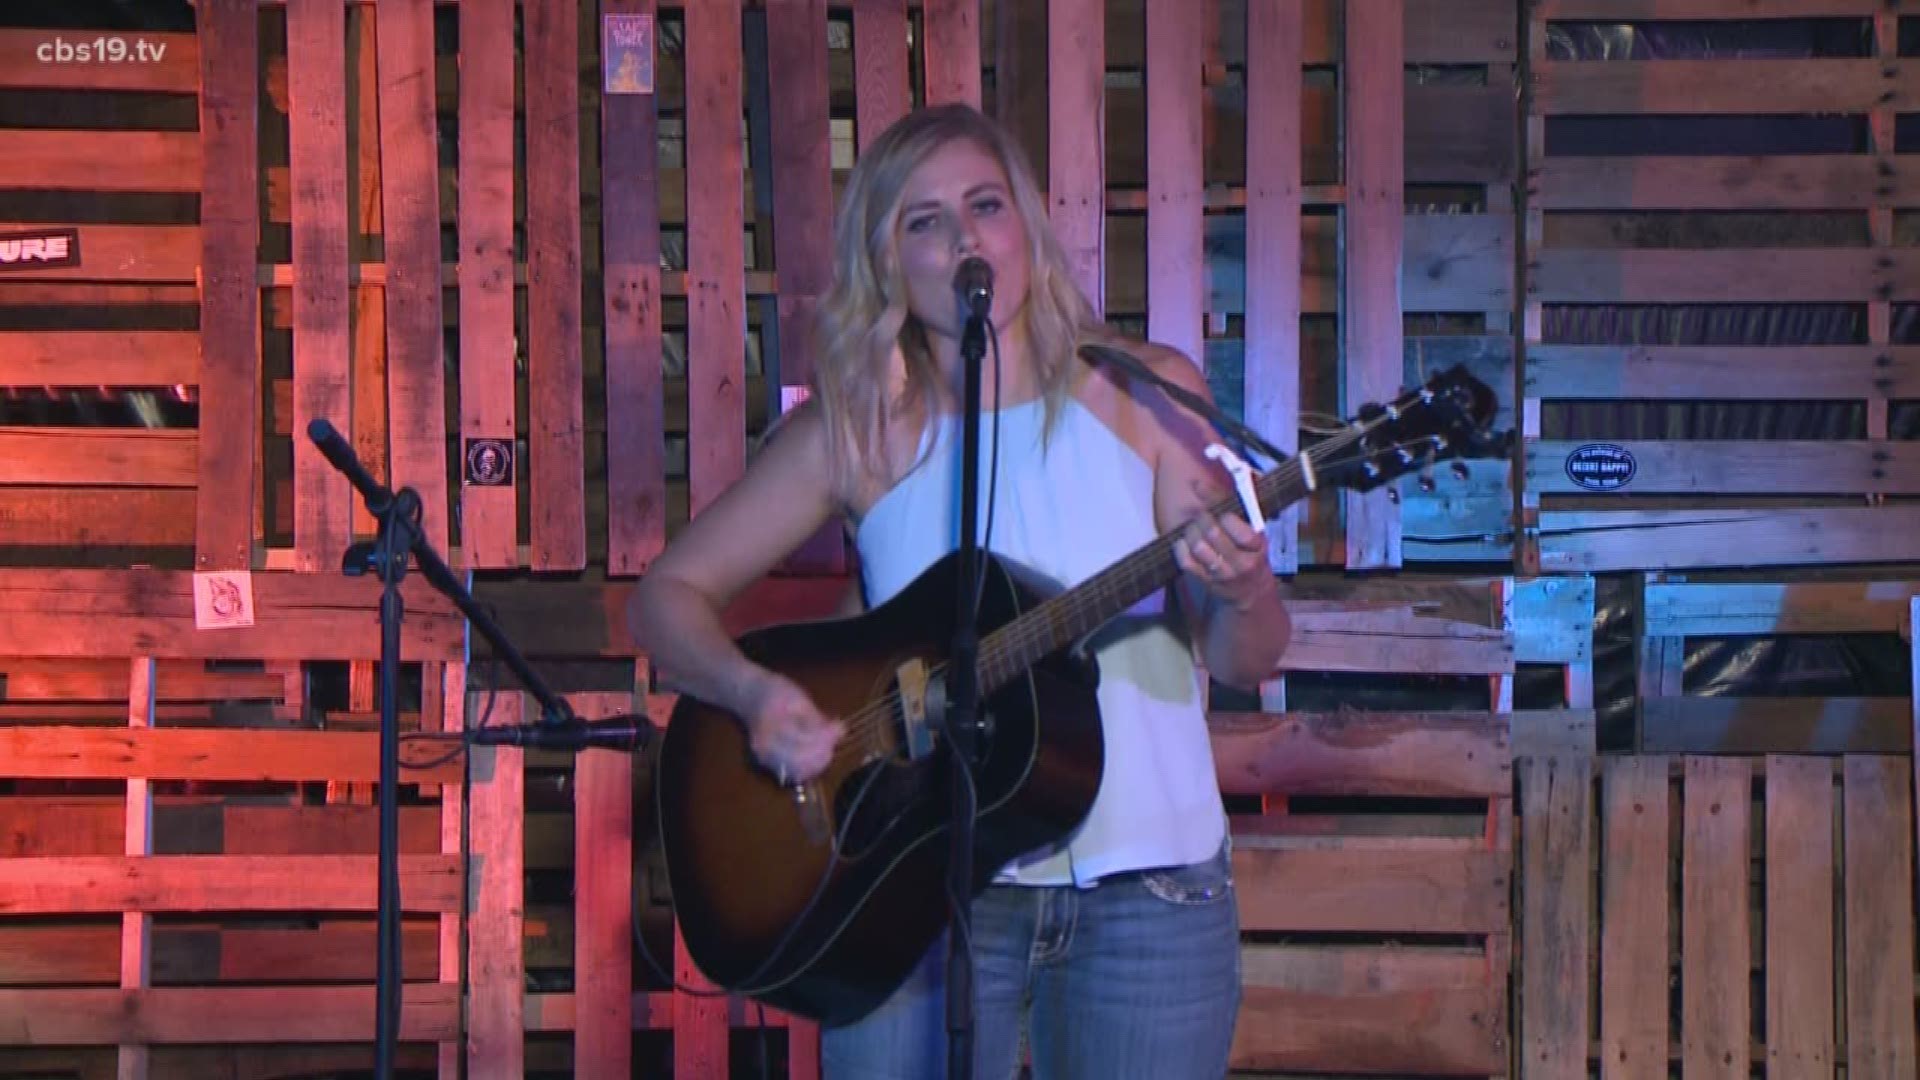 Singer-songwriter Anna Stockdale visits CBS 19 to share her downhome country style on Music Monday sponsored by Stanley's Famous Pit Bar-B-Q.